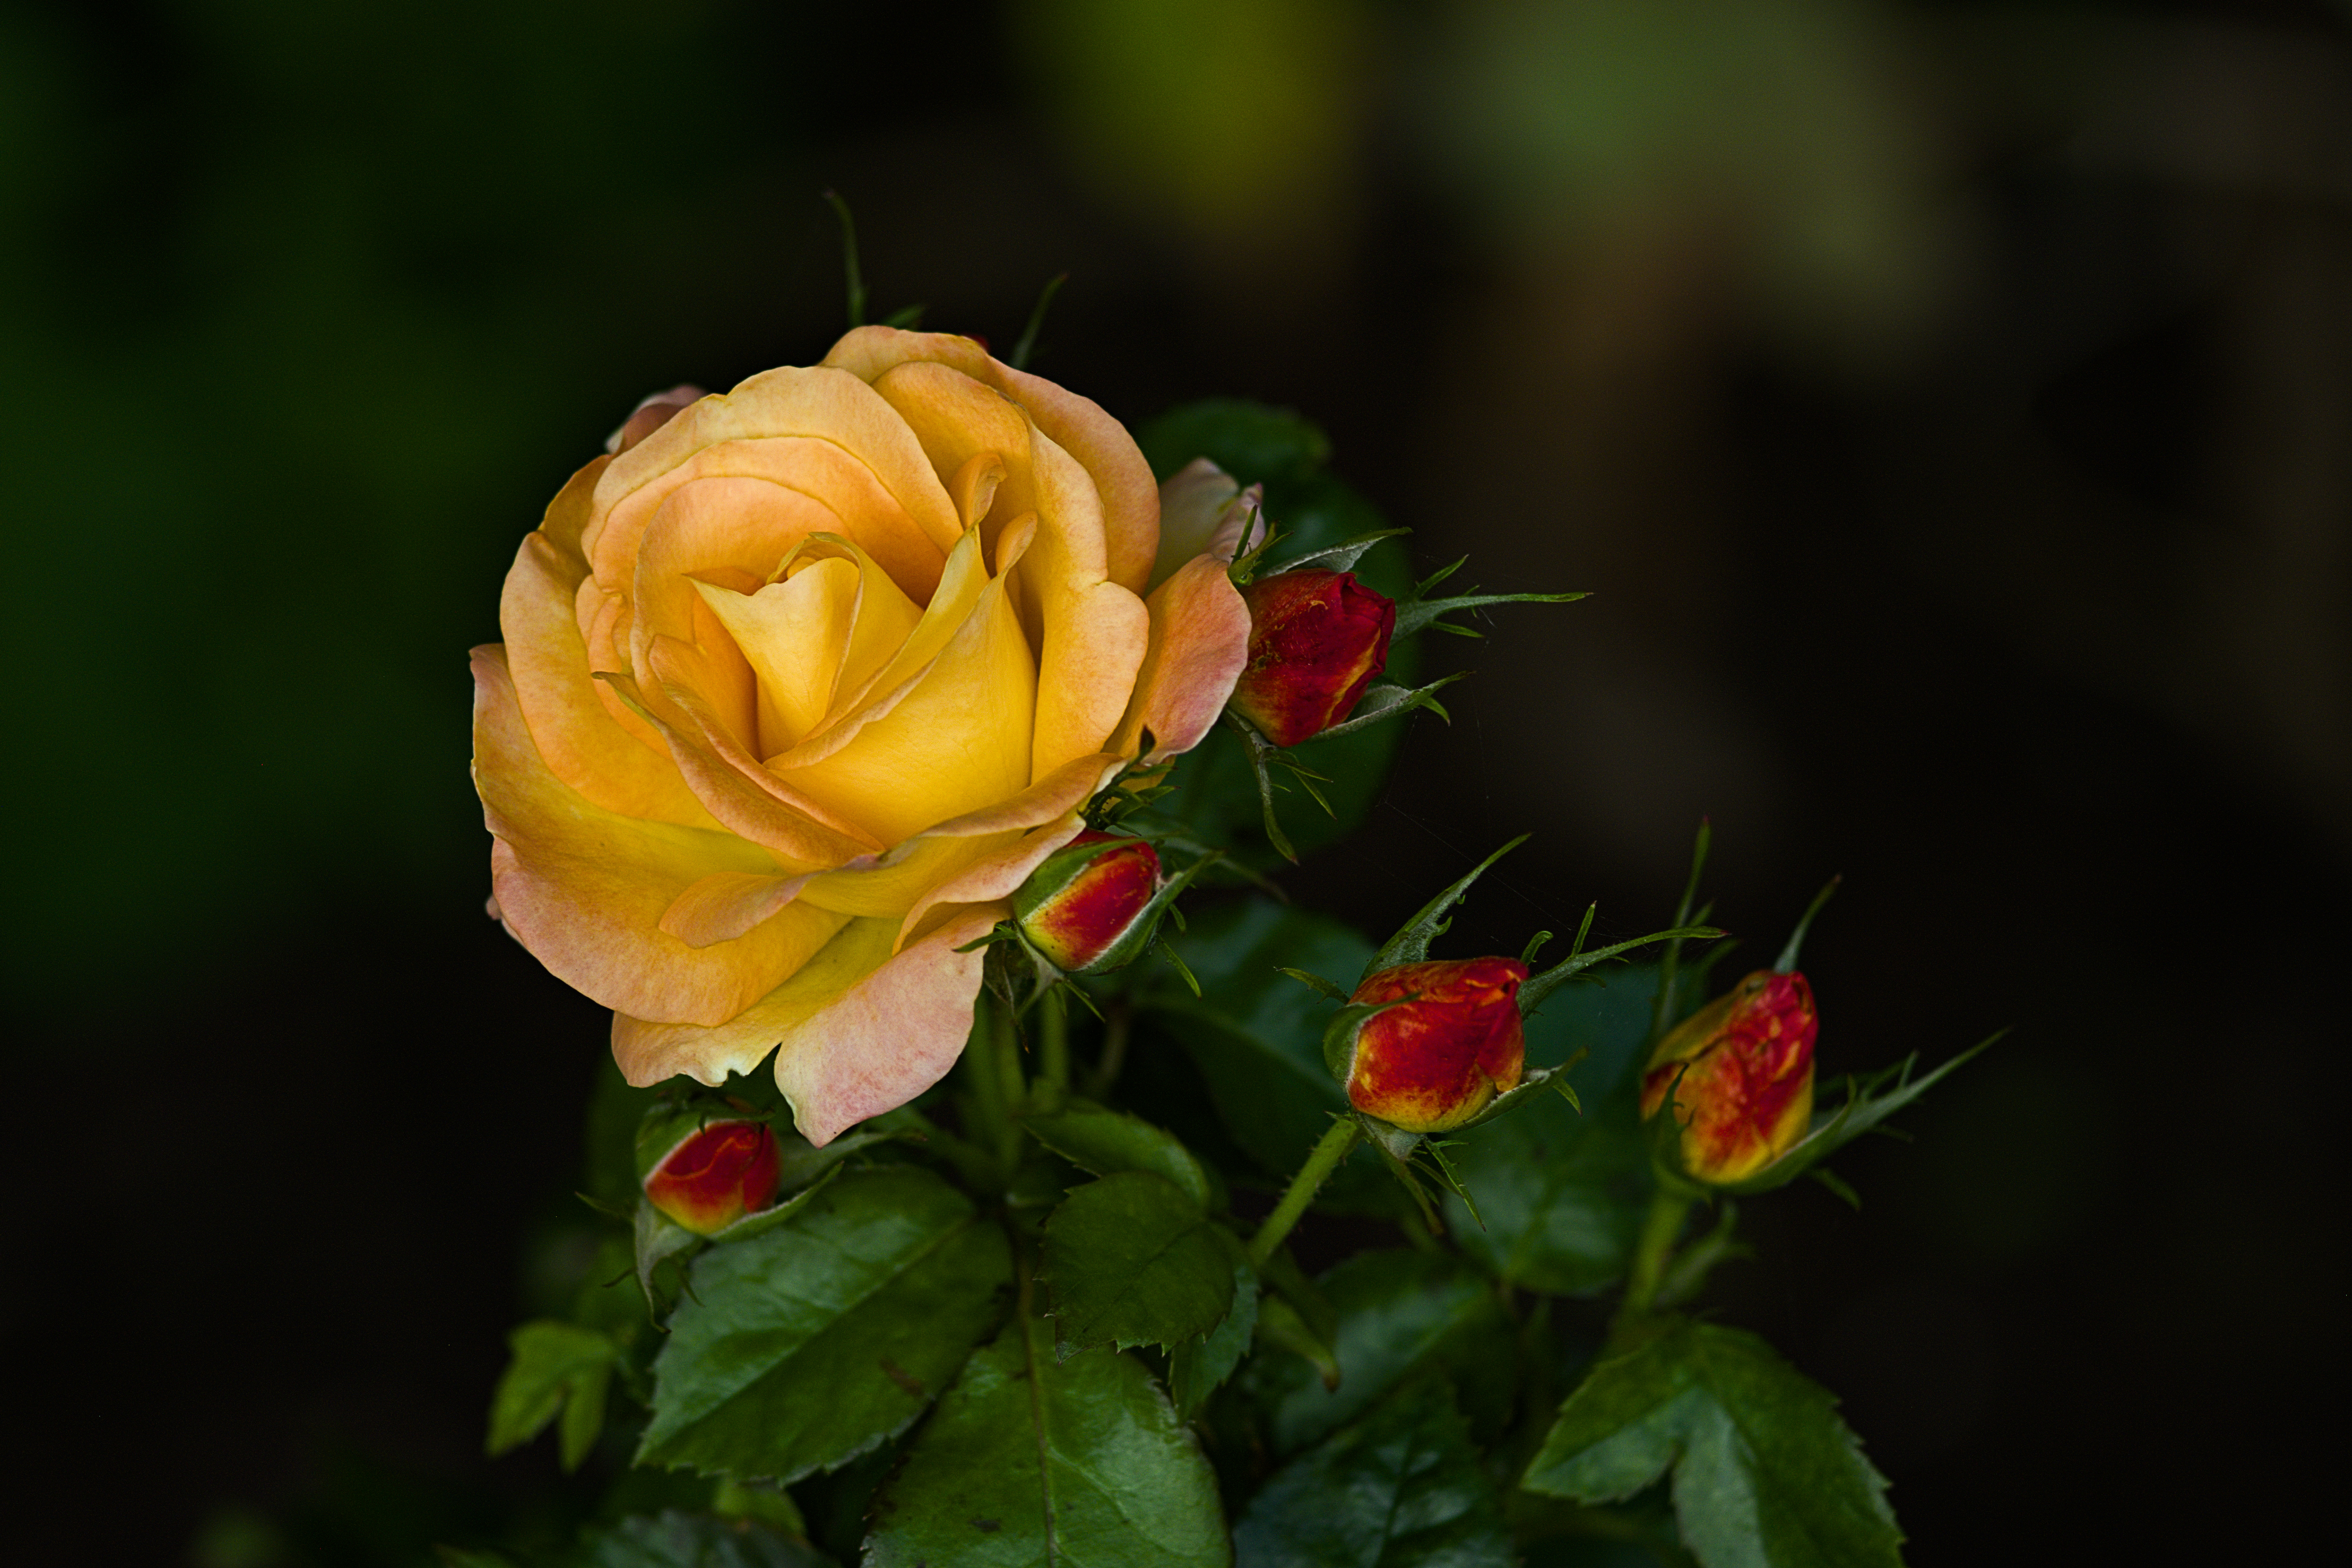 General 5000x3333 flowers nature depth of field blurred yellow red rose wild rose photography